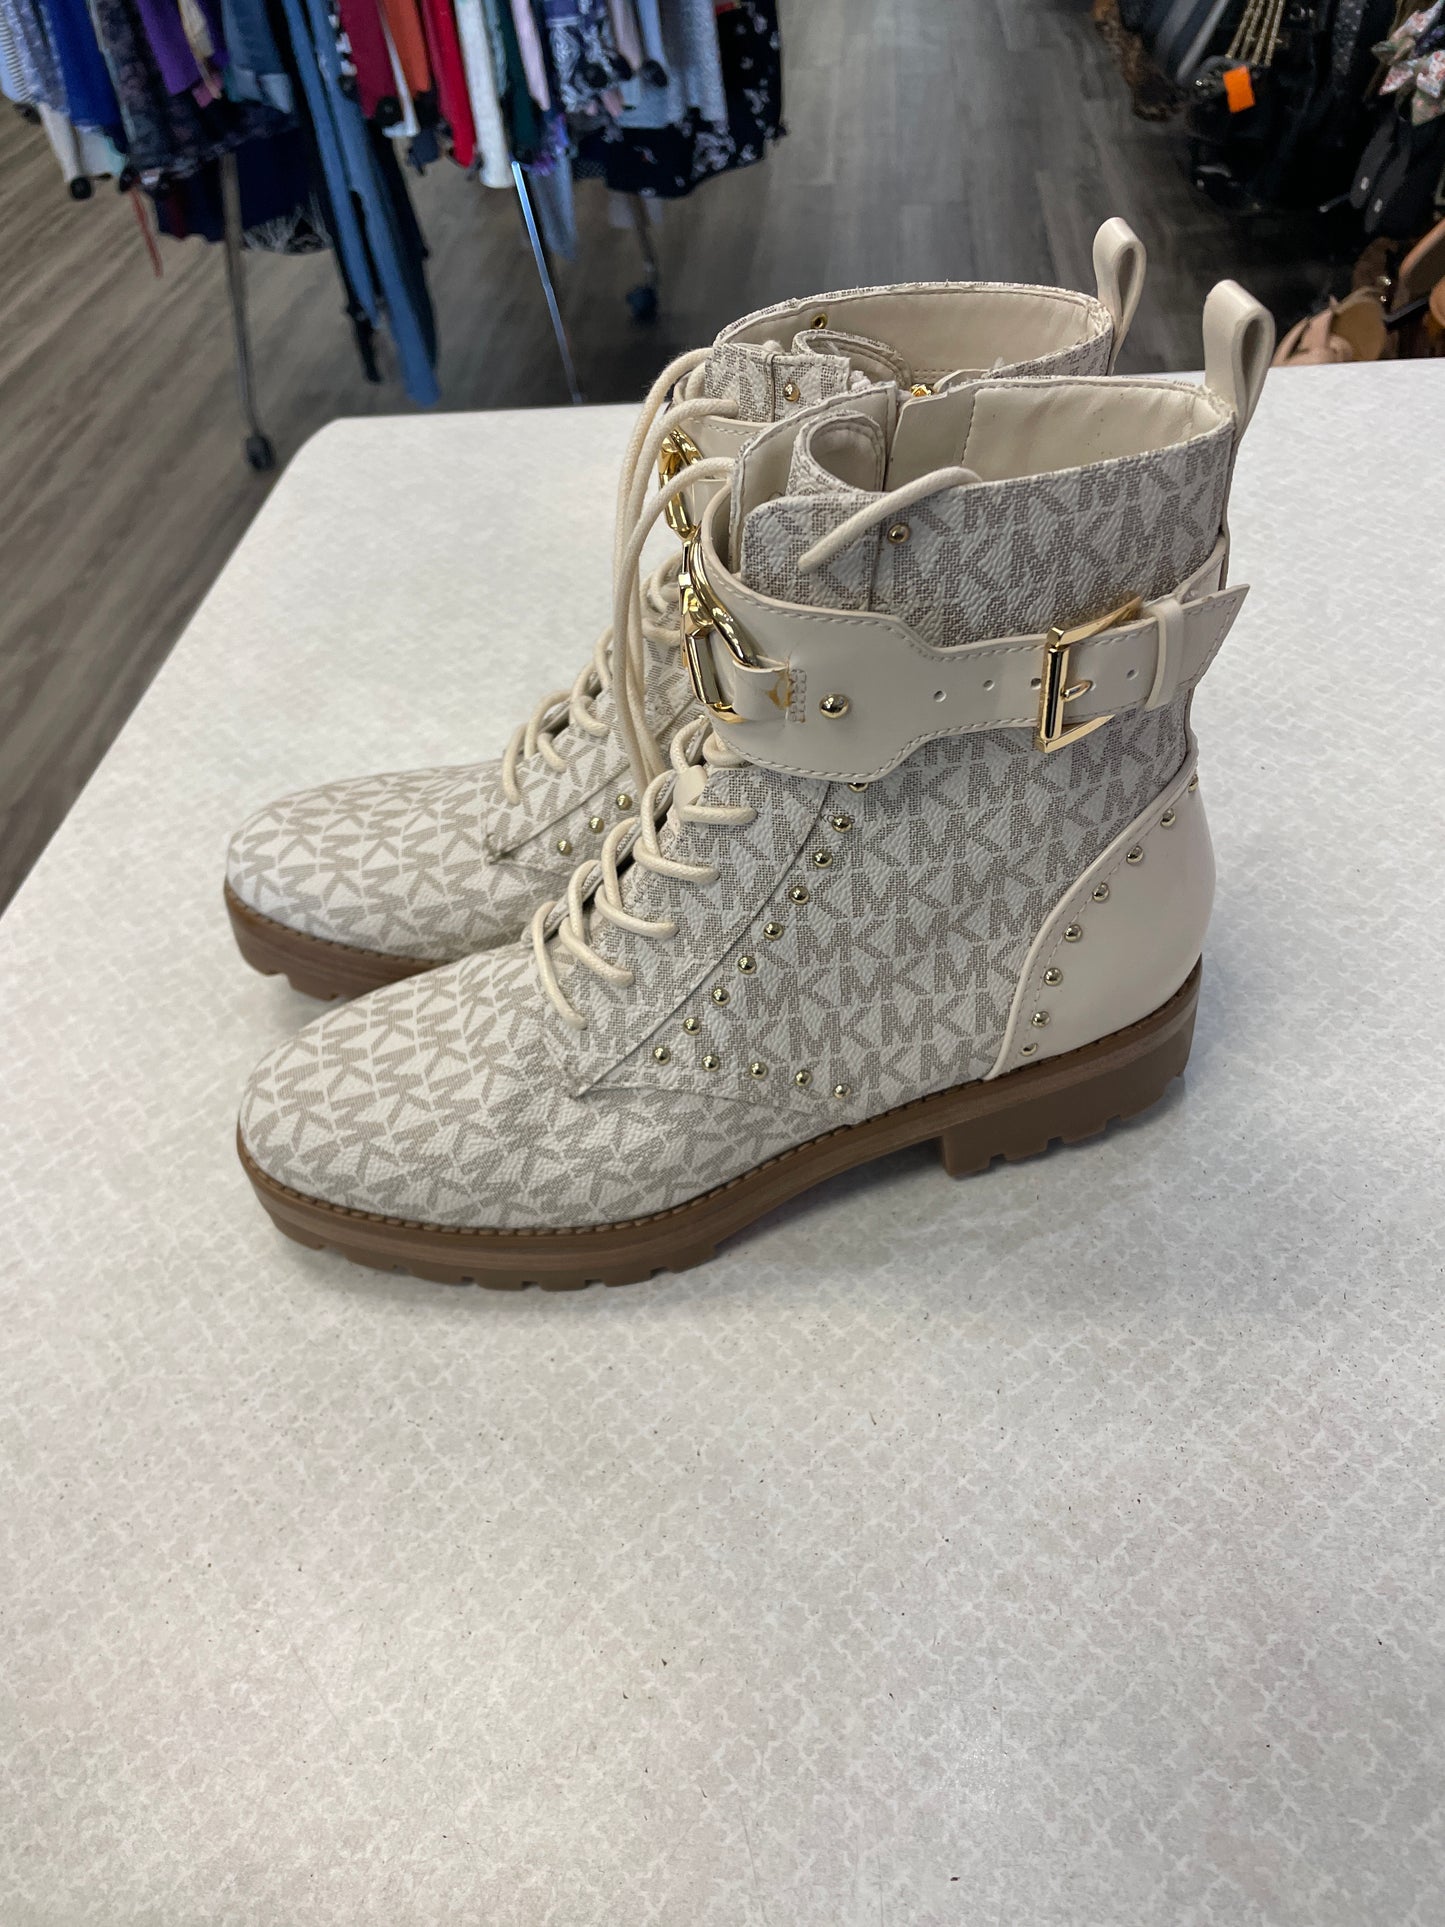 Boots Designer By Michael Kors  Size: 8.5